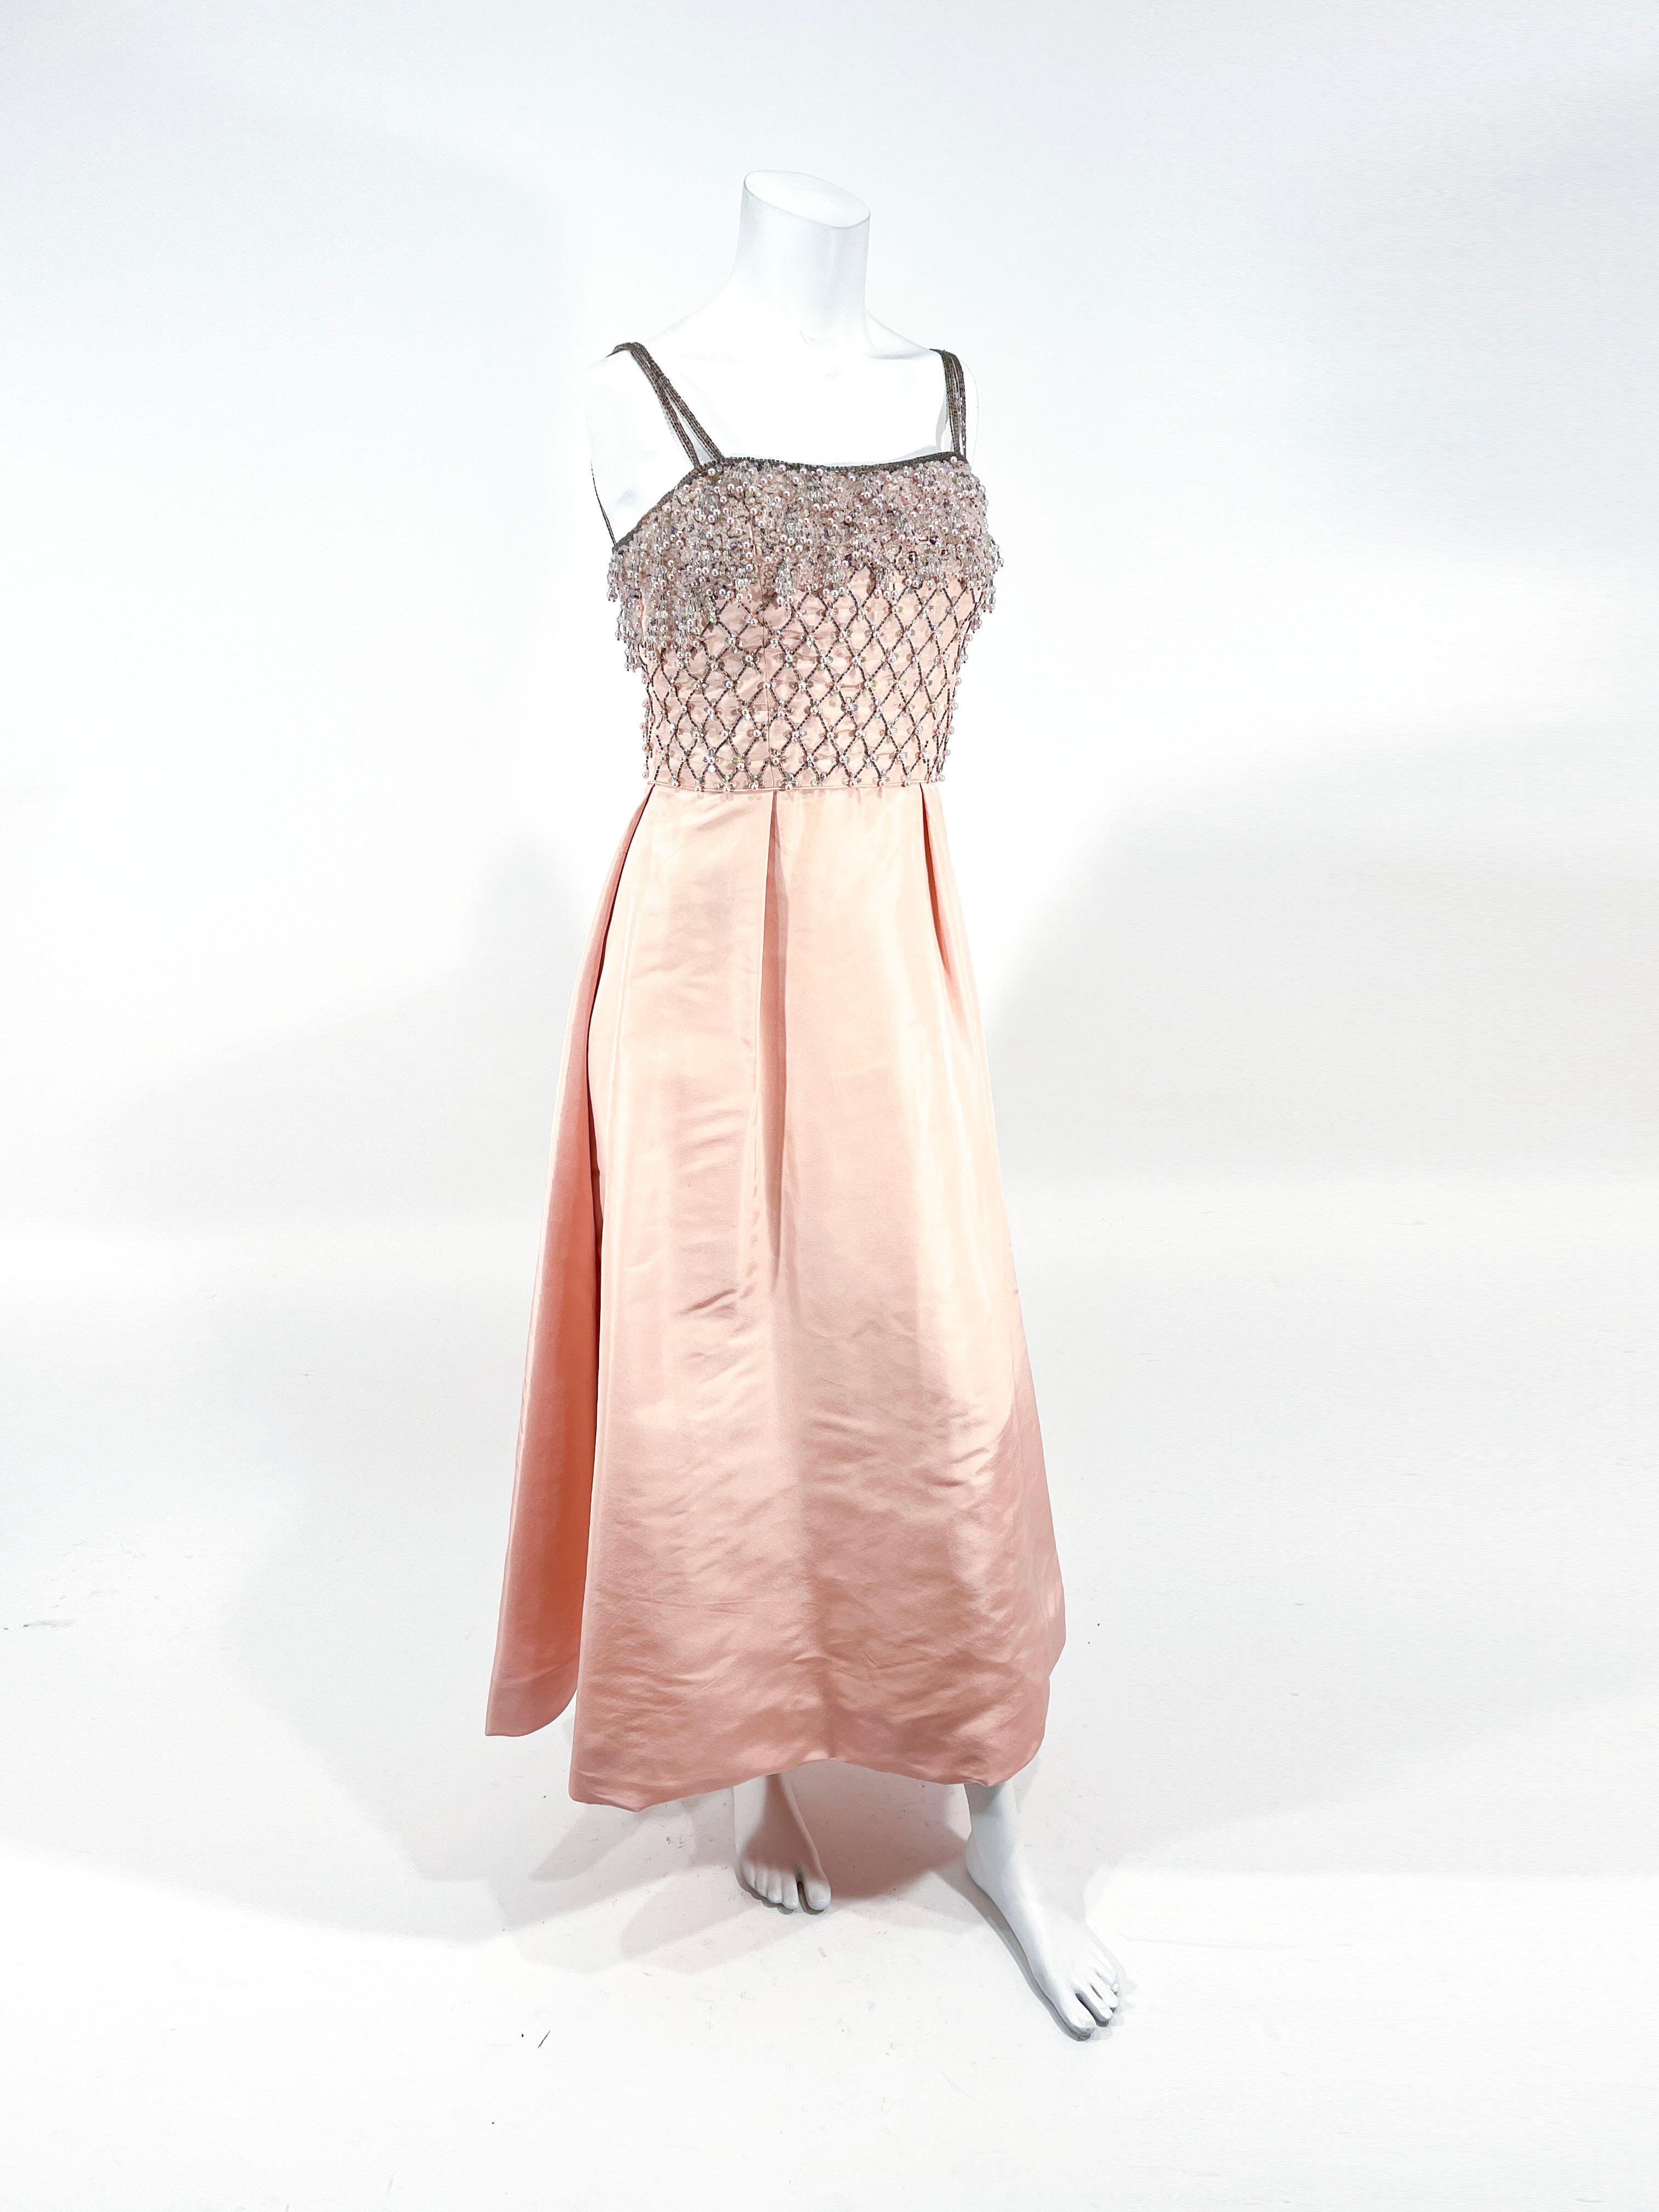 1960s Pale pink satin gown featuring a bodice adorned with beads, sequin, and hanging iridescent faux pearls. The interior of the bust is entirely structured and boned. The stain skirt is entirely faced to give the garment a full shape.